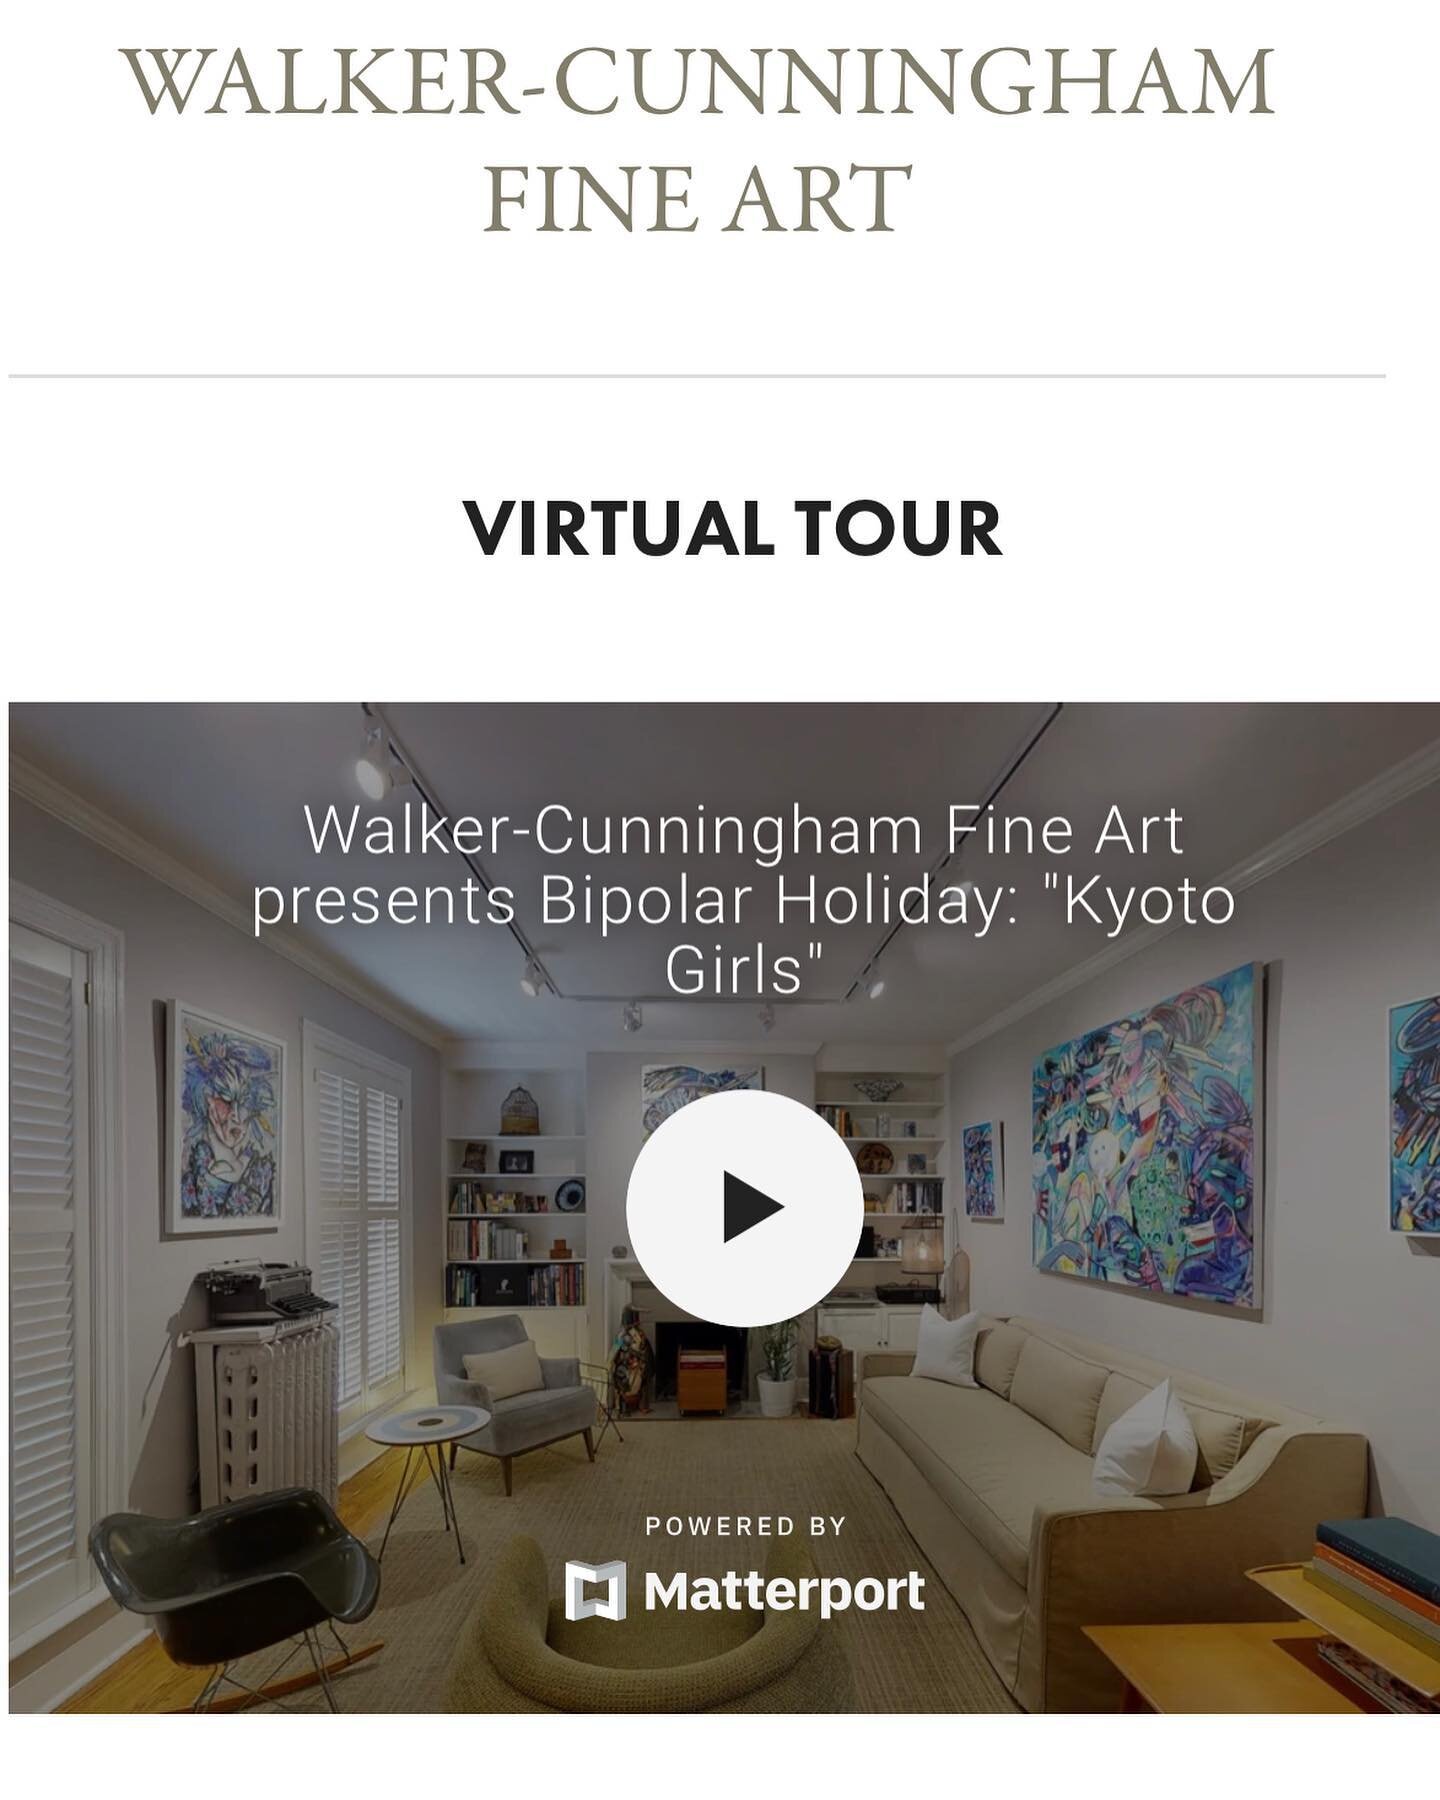 Take the virtual tour of Bipolar Holiday: Kyoto Girls pop-up ... float through the show via Matterport 3D and find clickable links on each painting to reveal details and pricing...Free domestic shipping through December 31. DM for details.
.
.
.
LINK